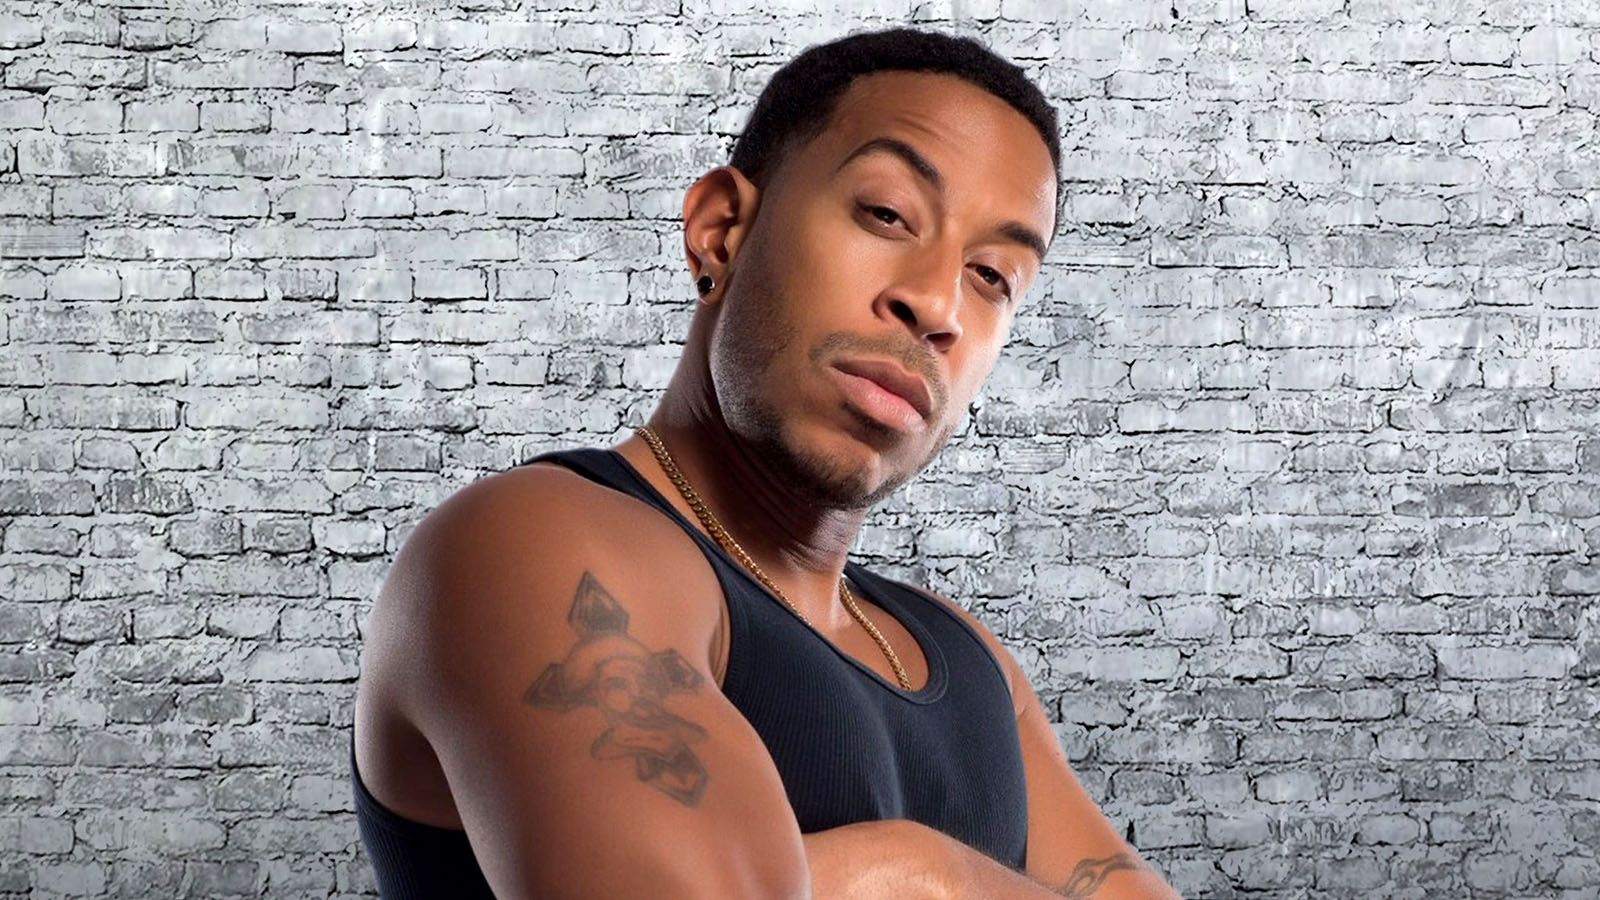 Ludacris will be the headliner when the Fort Wayne Music Festival stops by Headwaters Park on July 28.